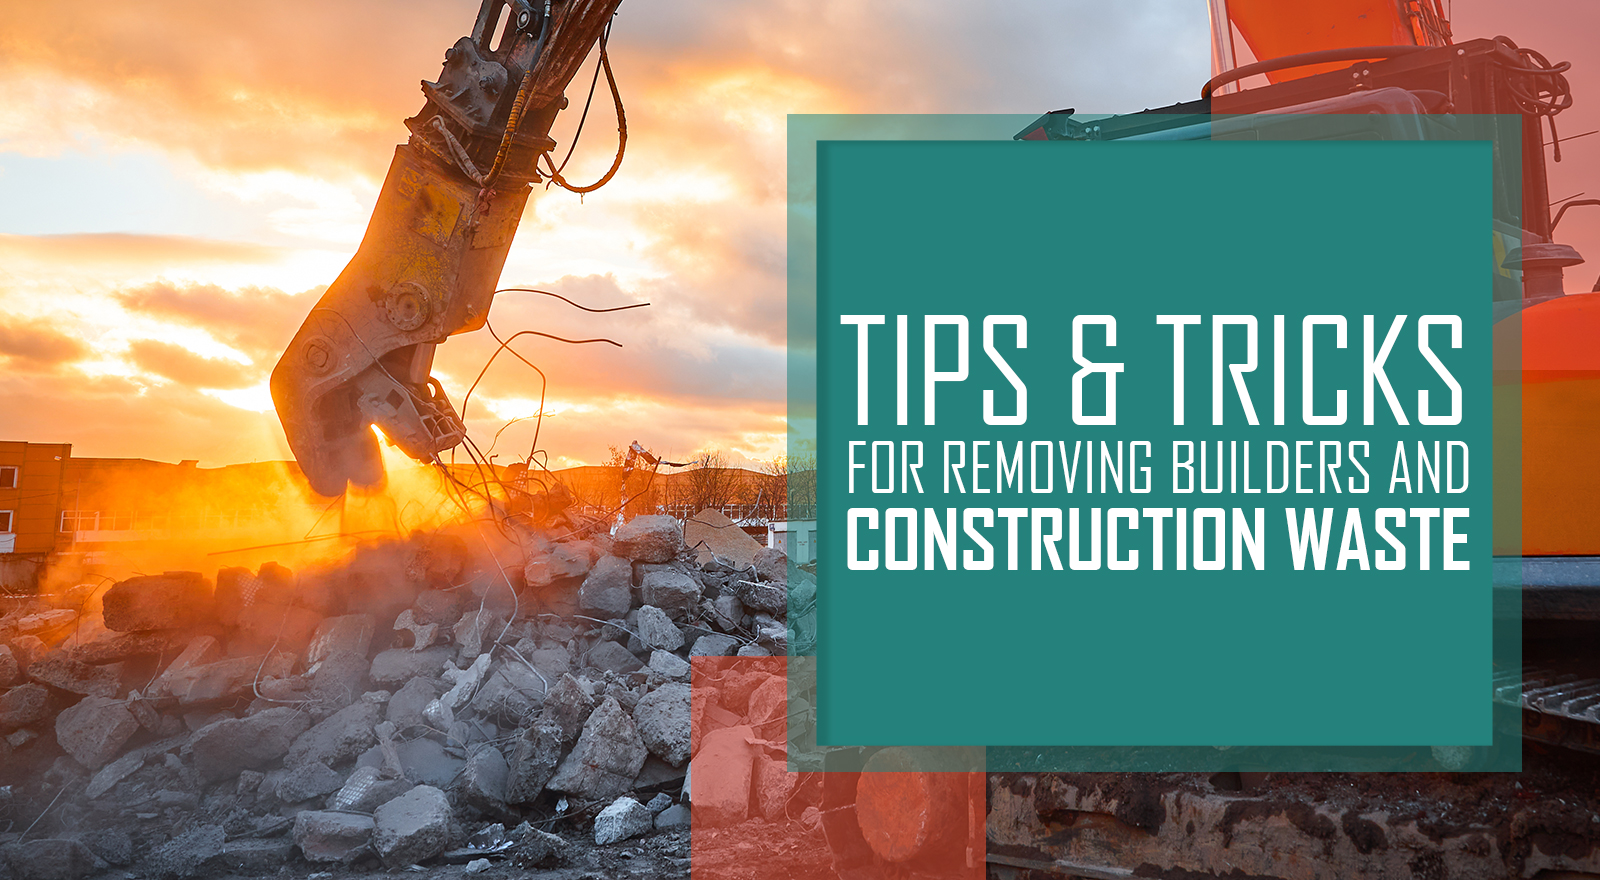 Tips and tricks for removing builders and construction waste